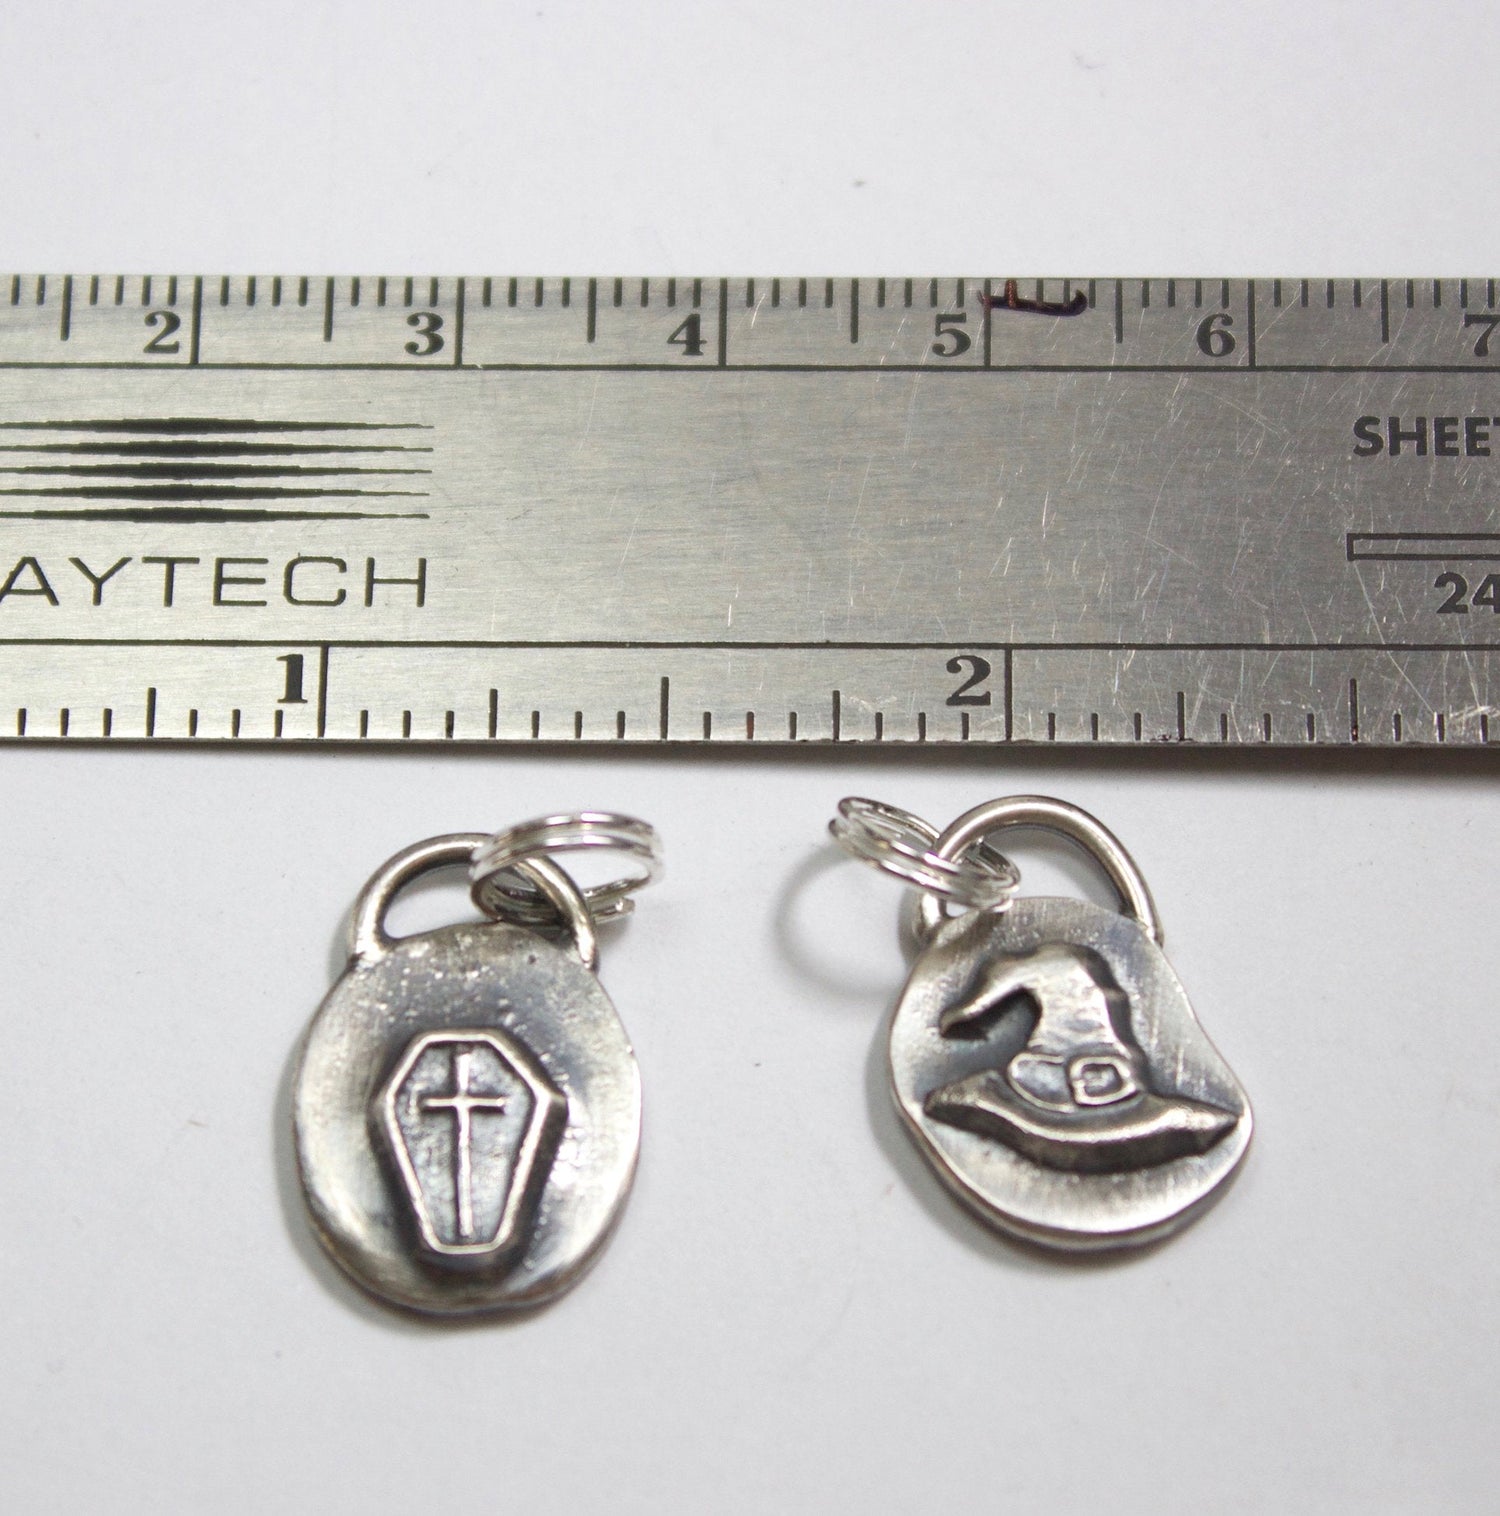 Sterling silver coffin and witches hat charms shown with ruler for scale.